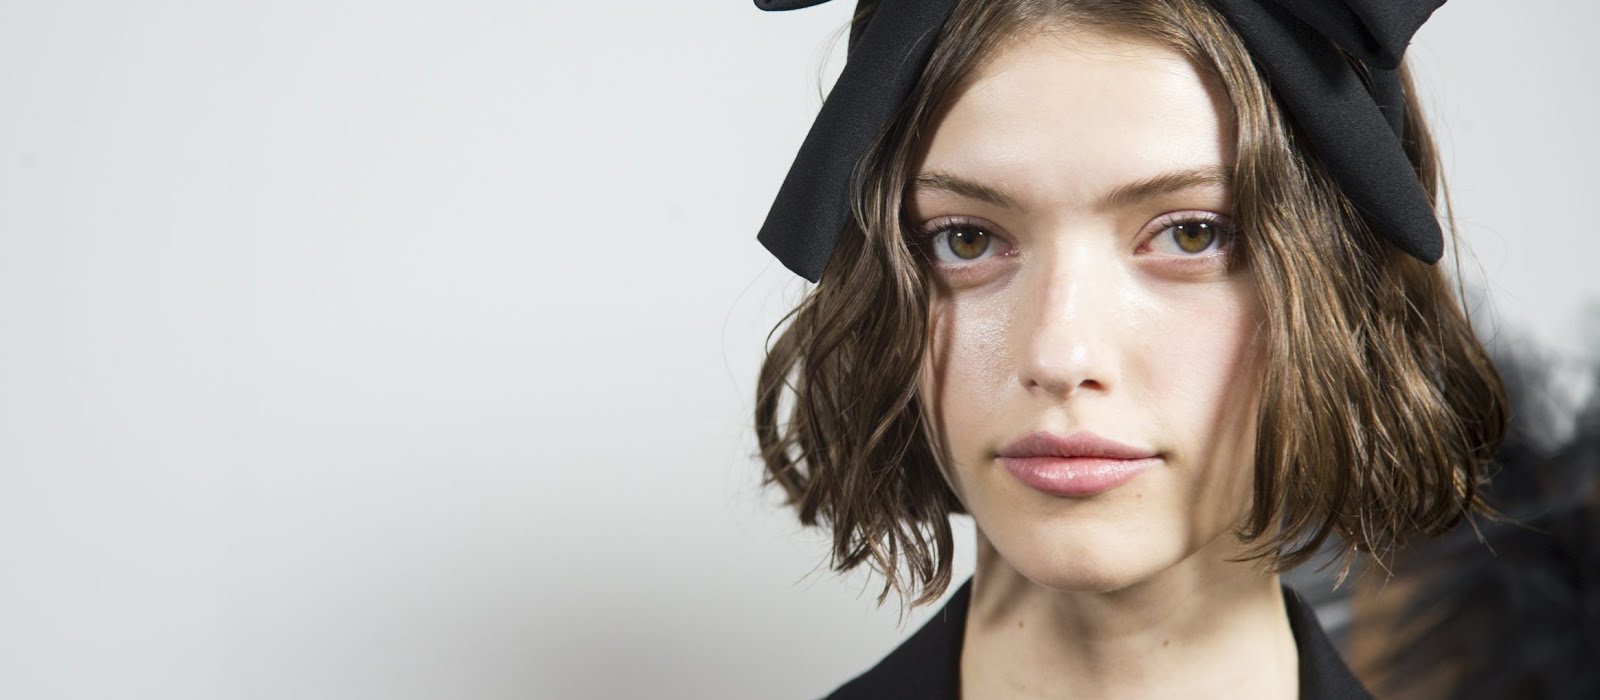 Trending hair accessories for when you really need to visit the hairdresser